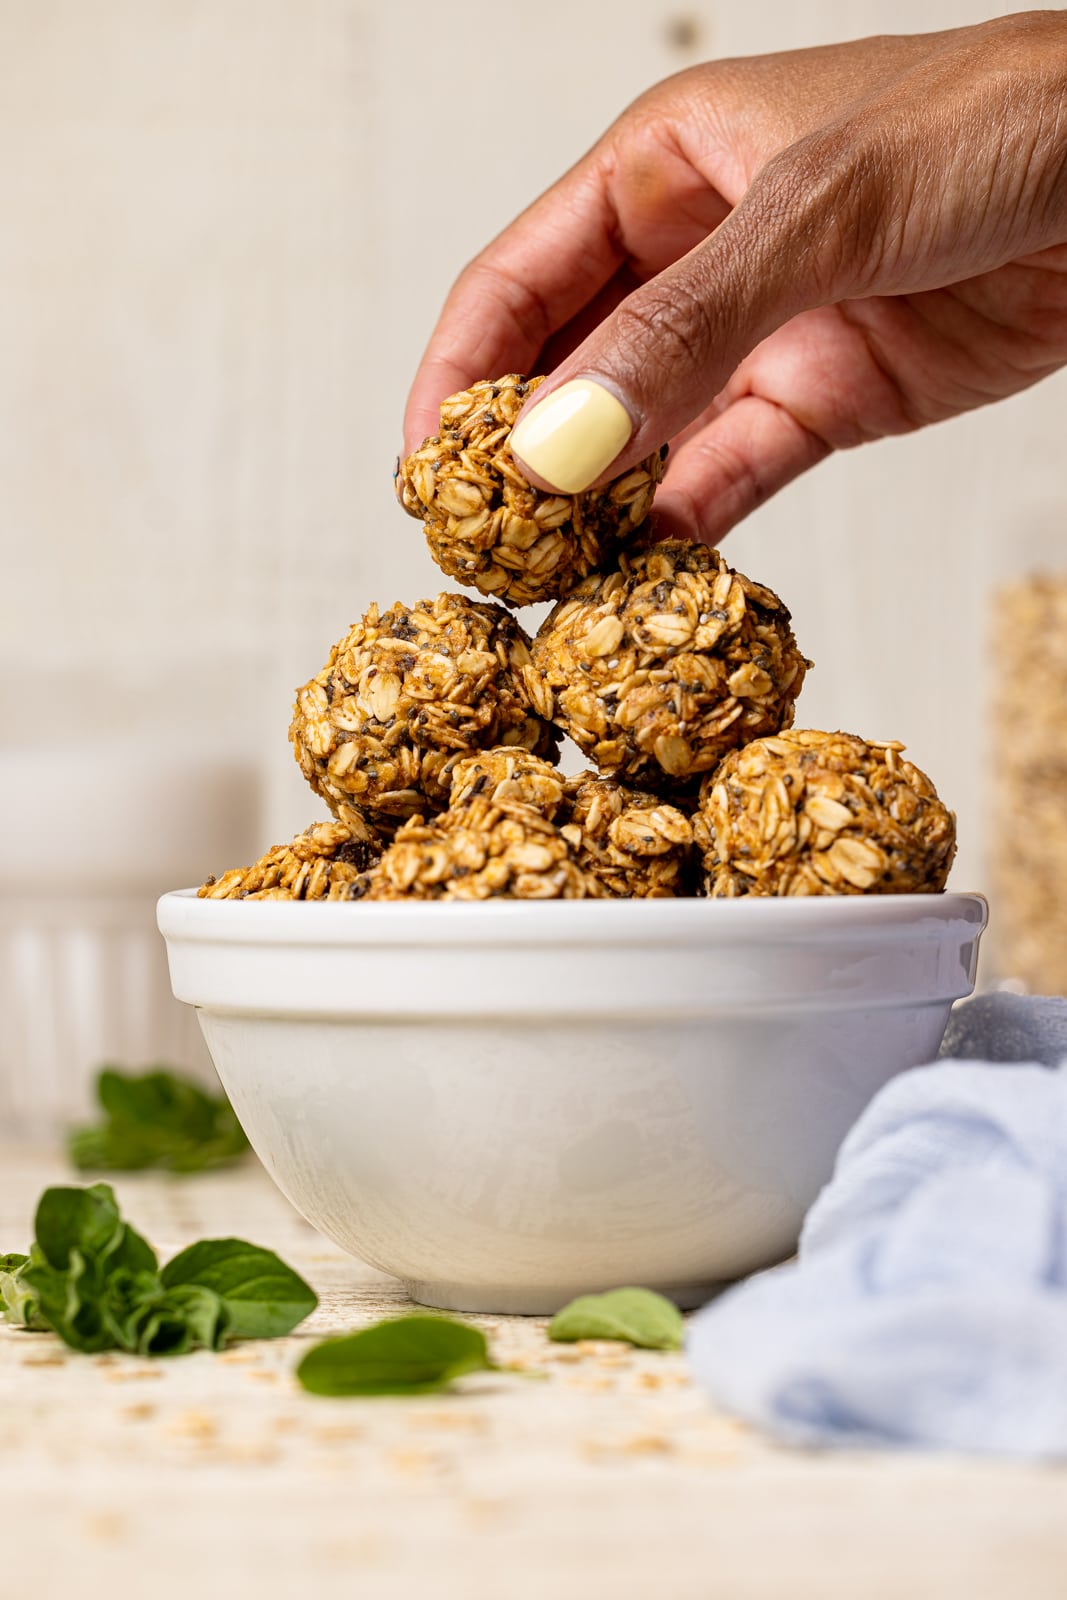 Protein balls stacked on each other in a white bowl on a white wood table with herbs and a light blue napkin and one ball being picked up.